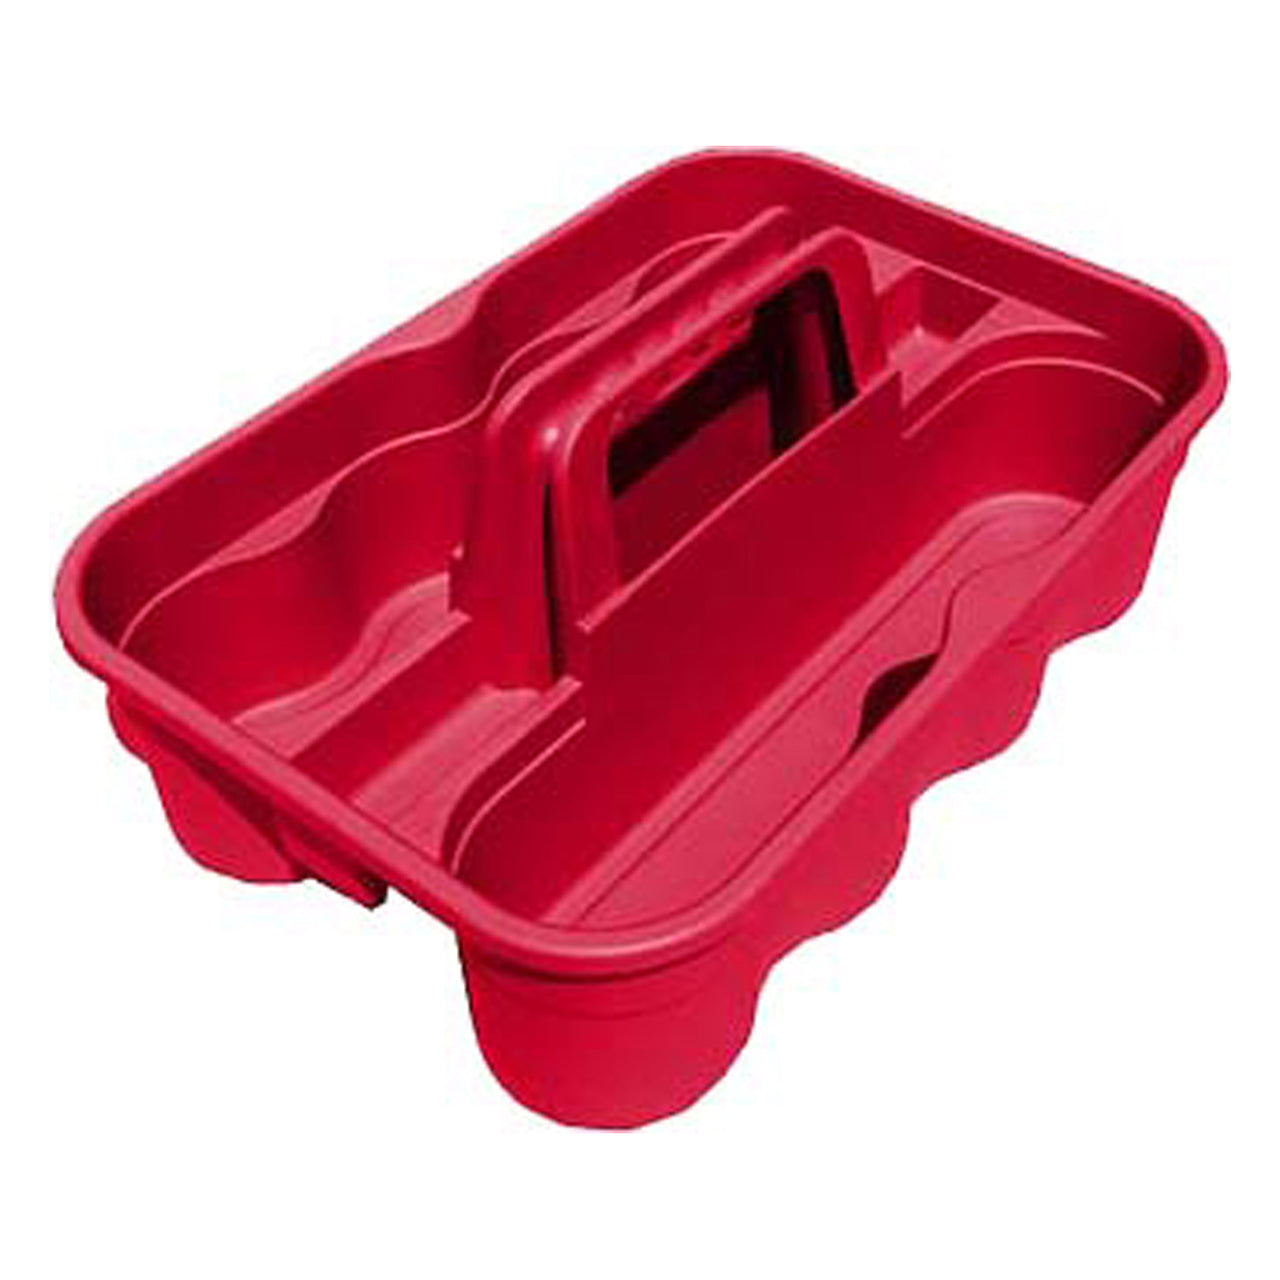 Tuff Stuff Bottle Carry Caddy - Red - Buckets Pails Feeders Scoops Tubs Bottles Tuff Stuff - Canada